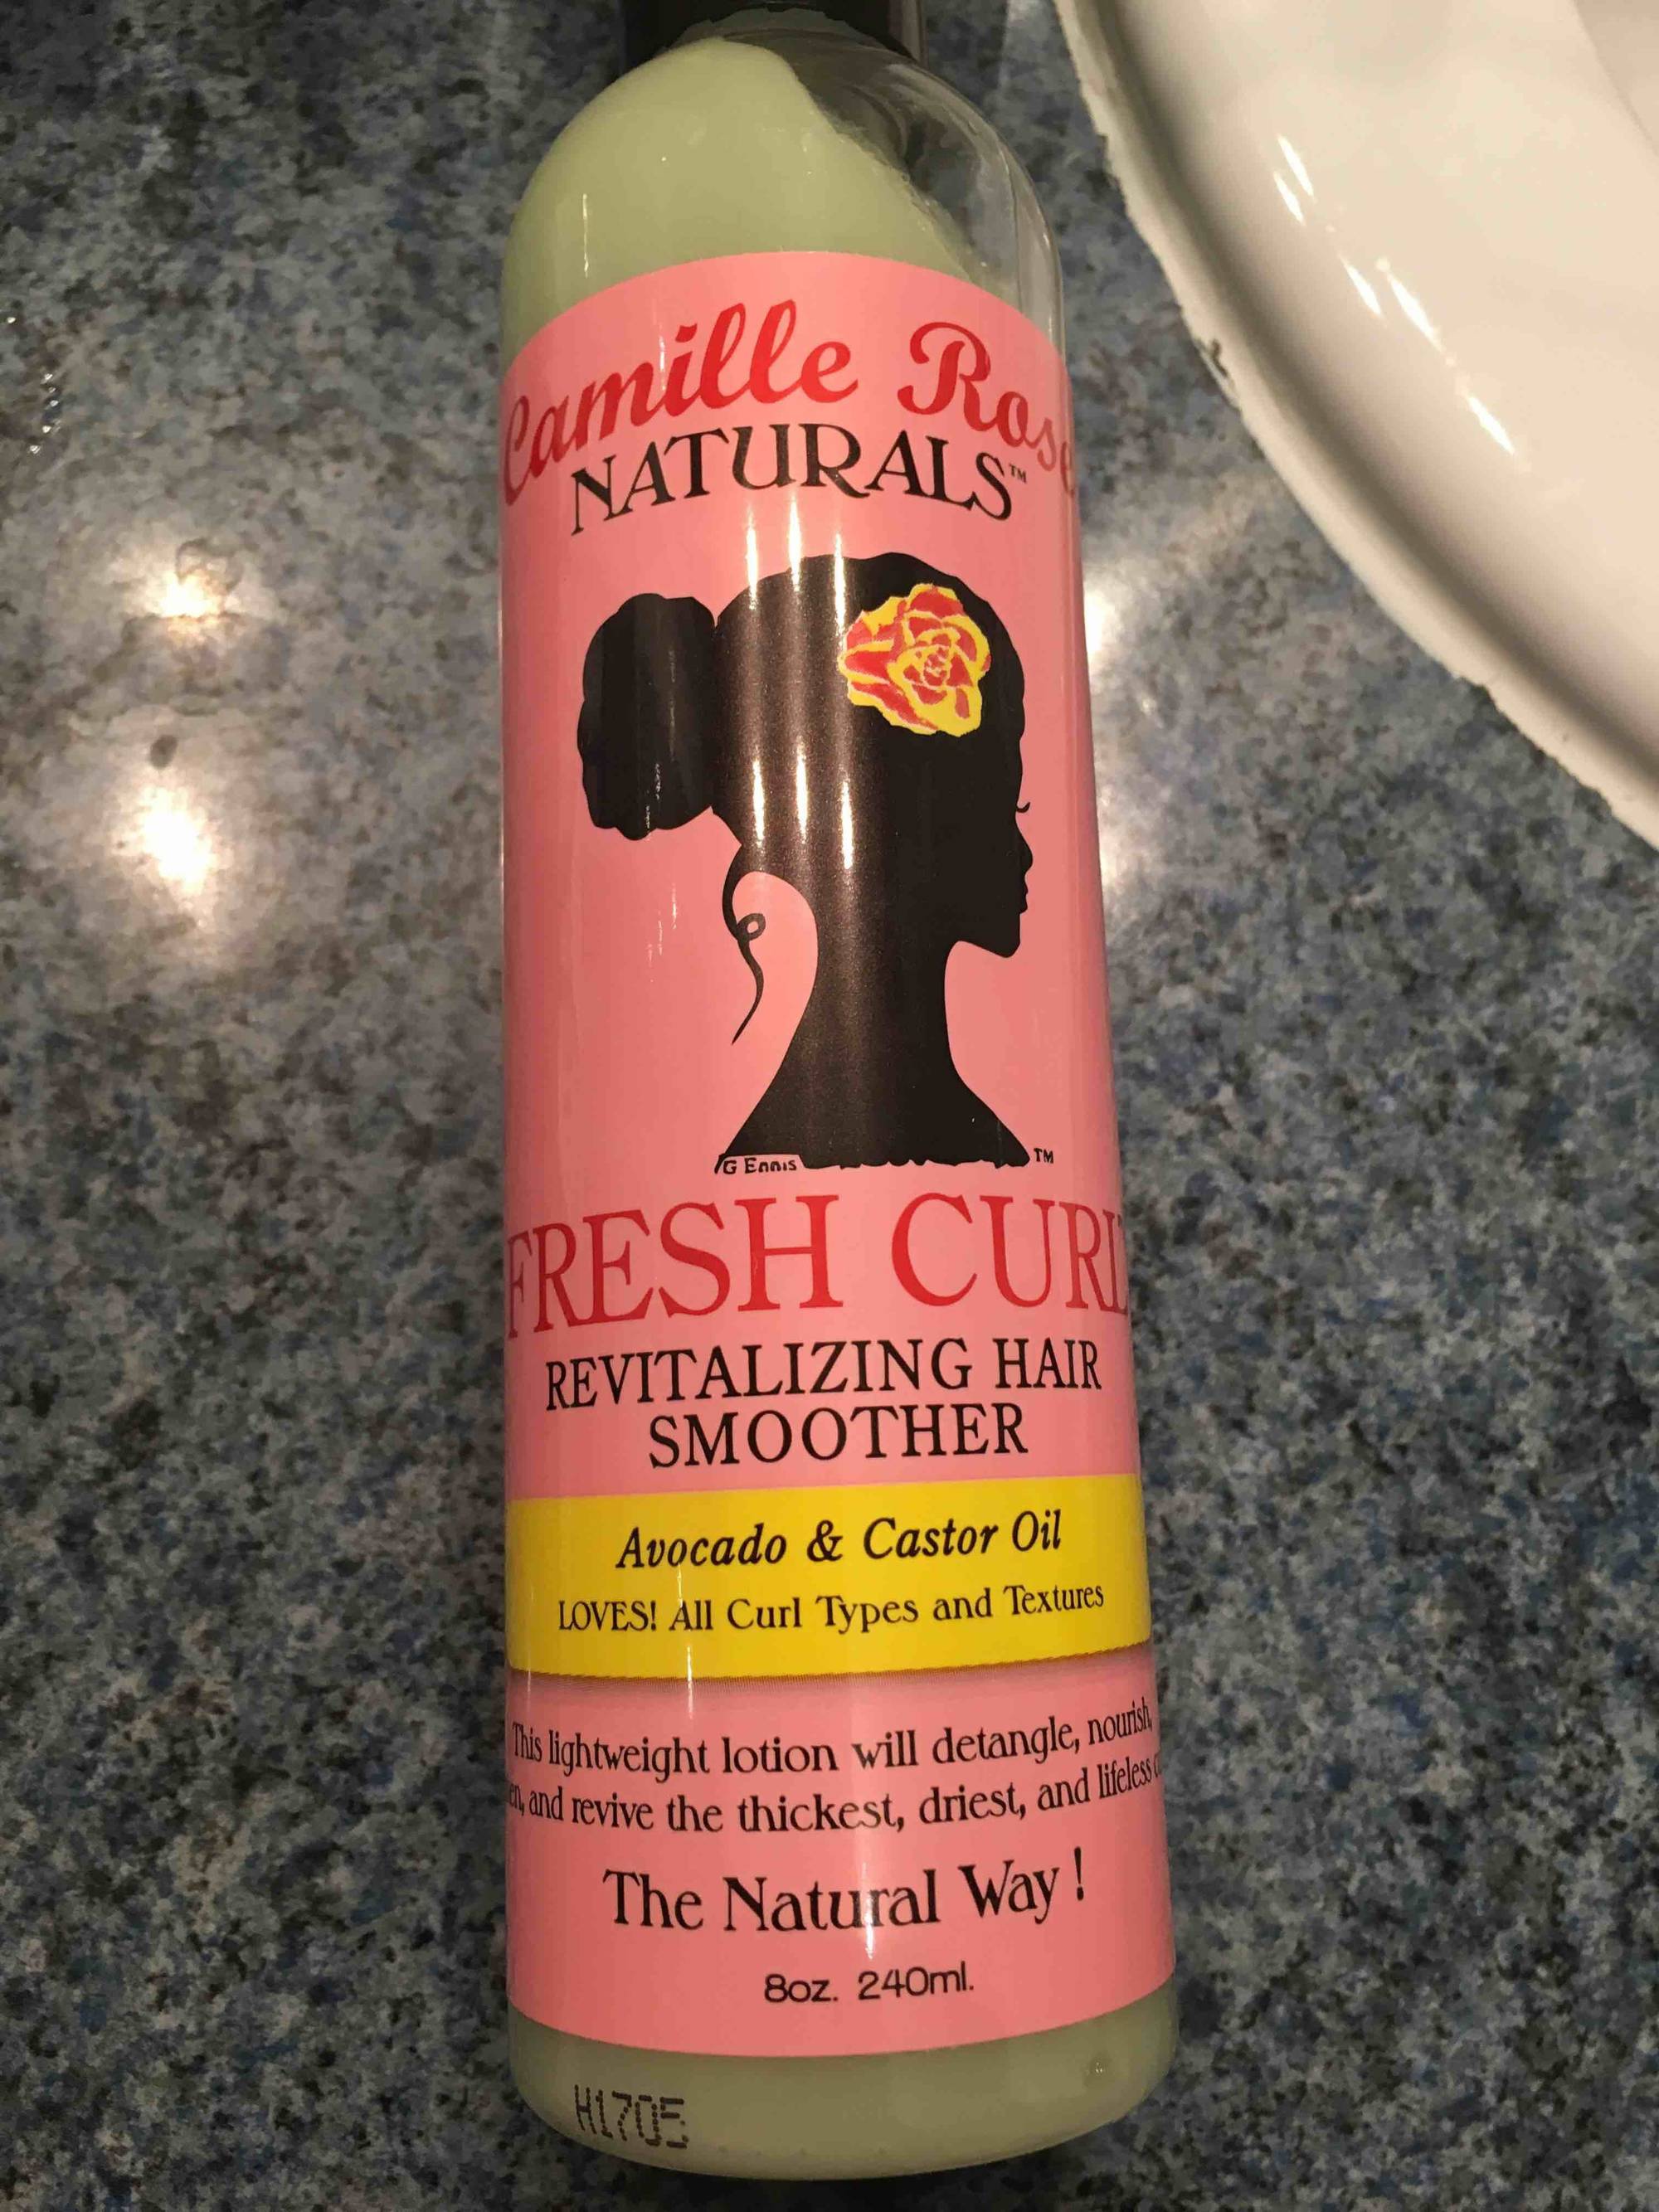 CAMILLE ROSE NATURALS - Fresh curl - Revitalizing hair smoother